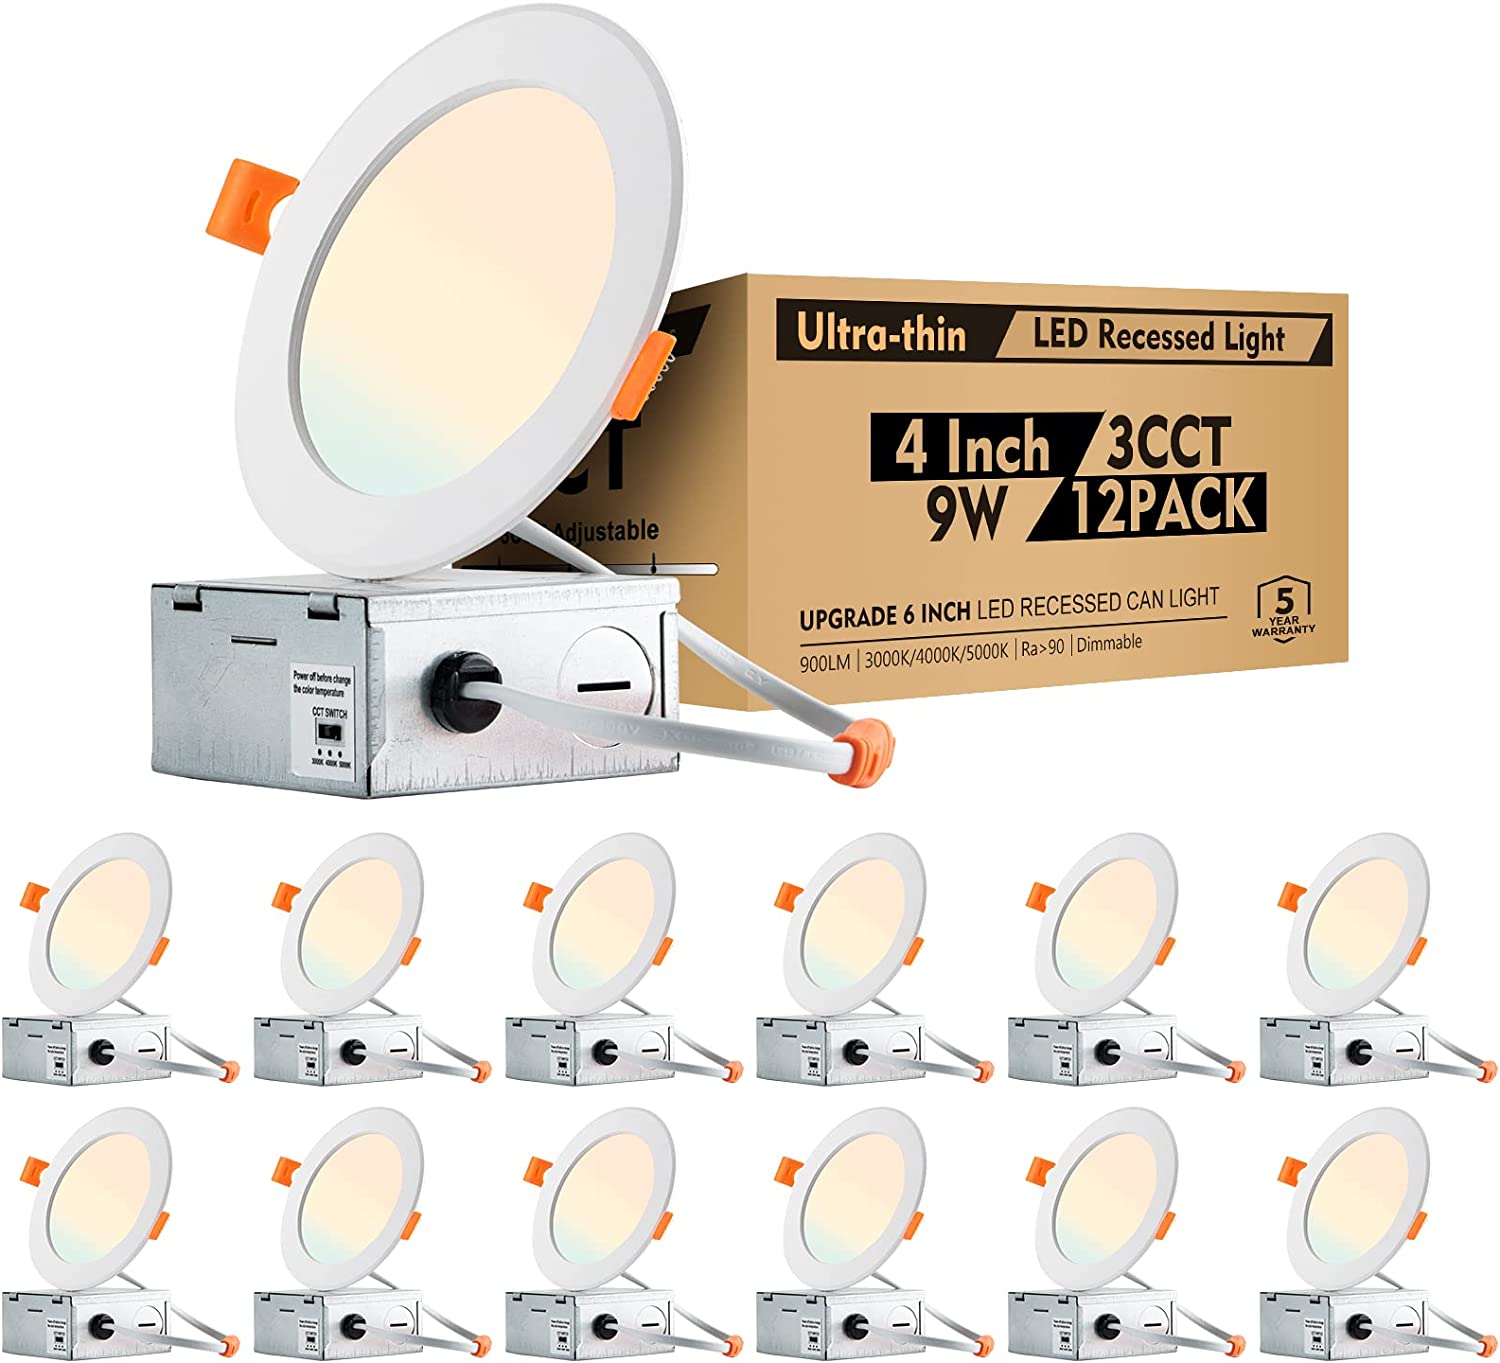 Lightdot 12 of Pack LED Recessed Lighting 4 inch LED Can Lights Dimmable Resseced Light Fixtures